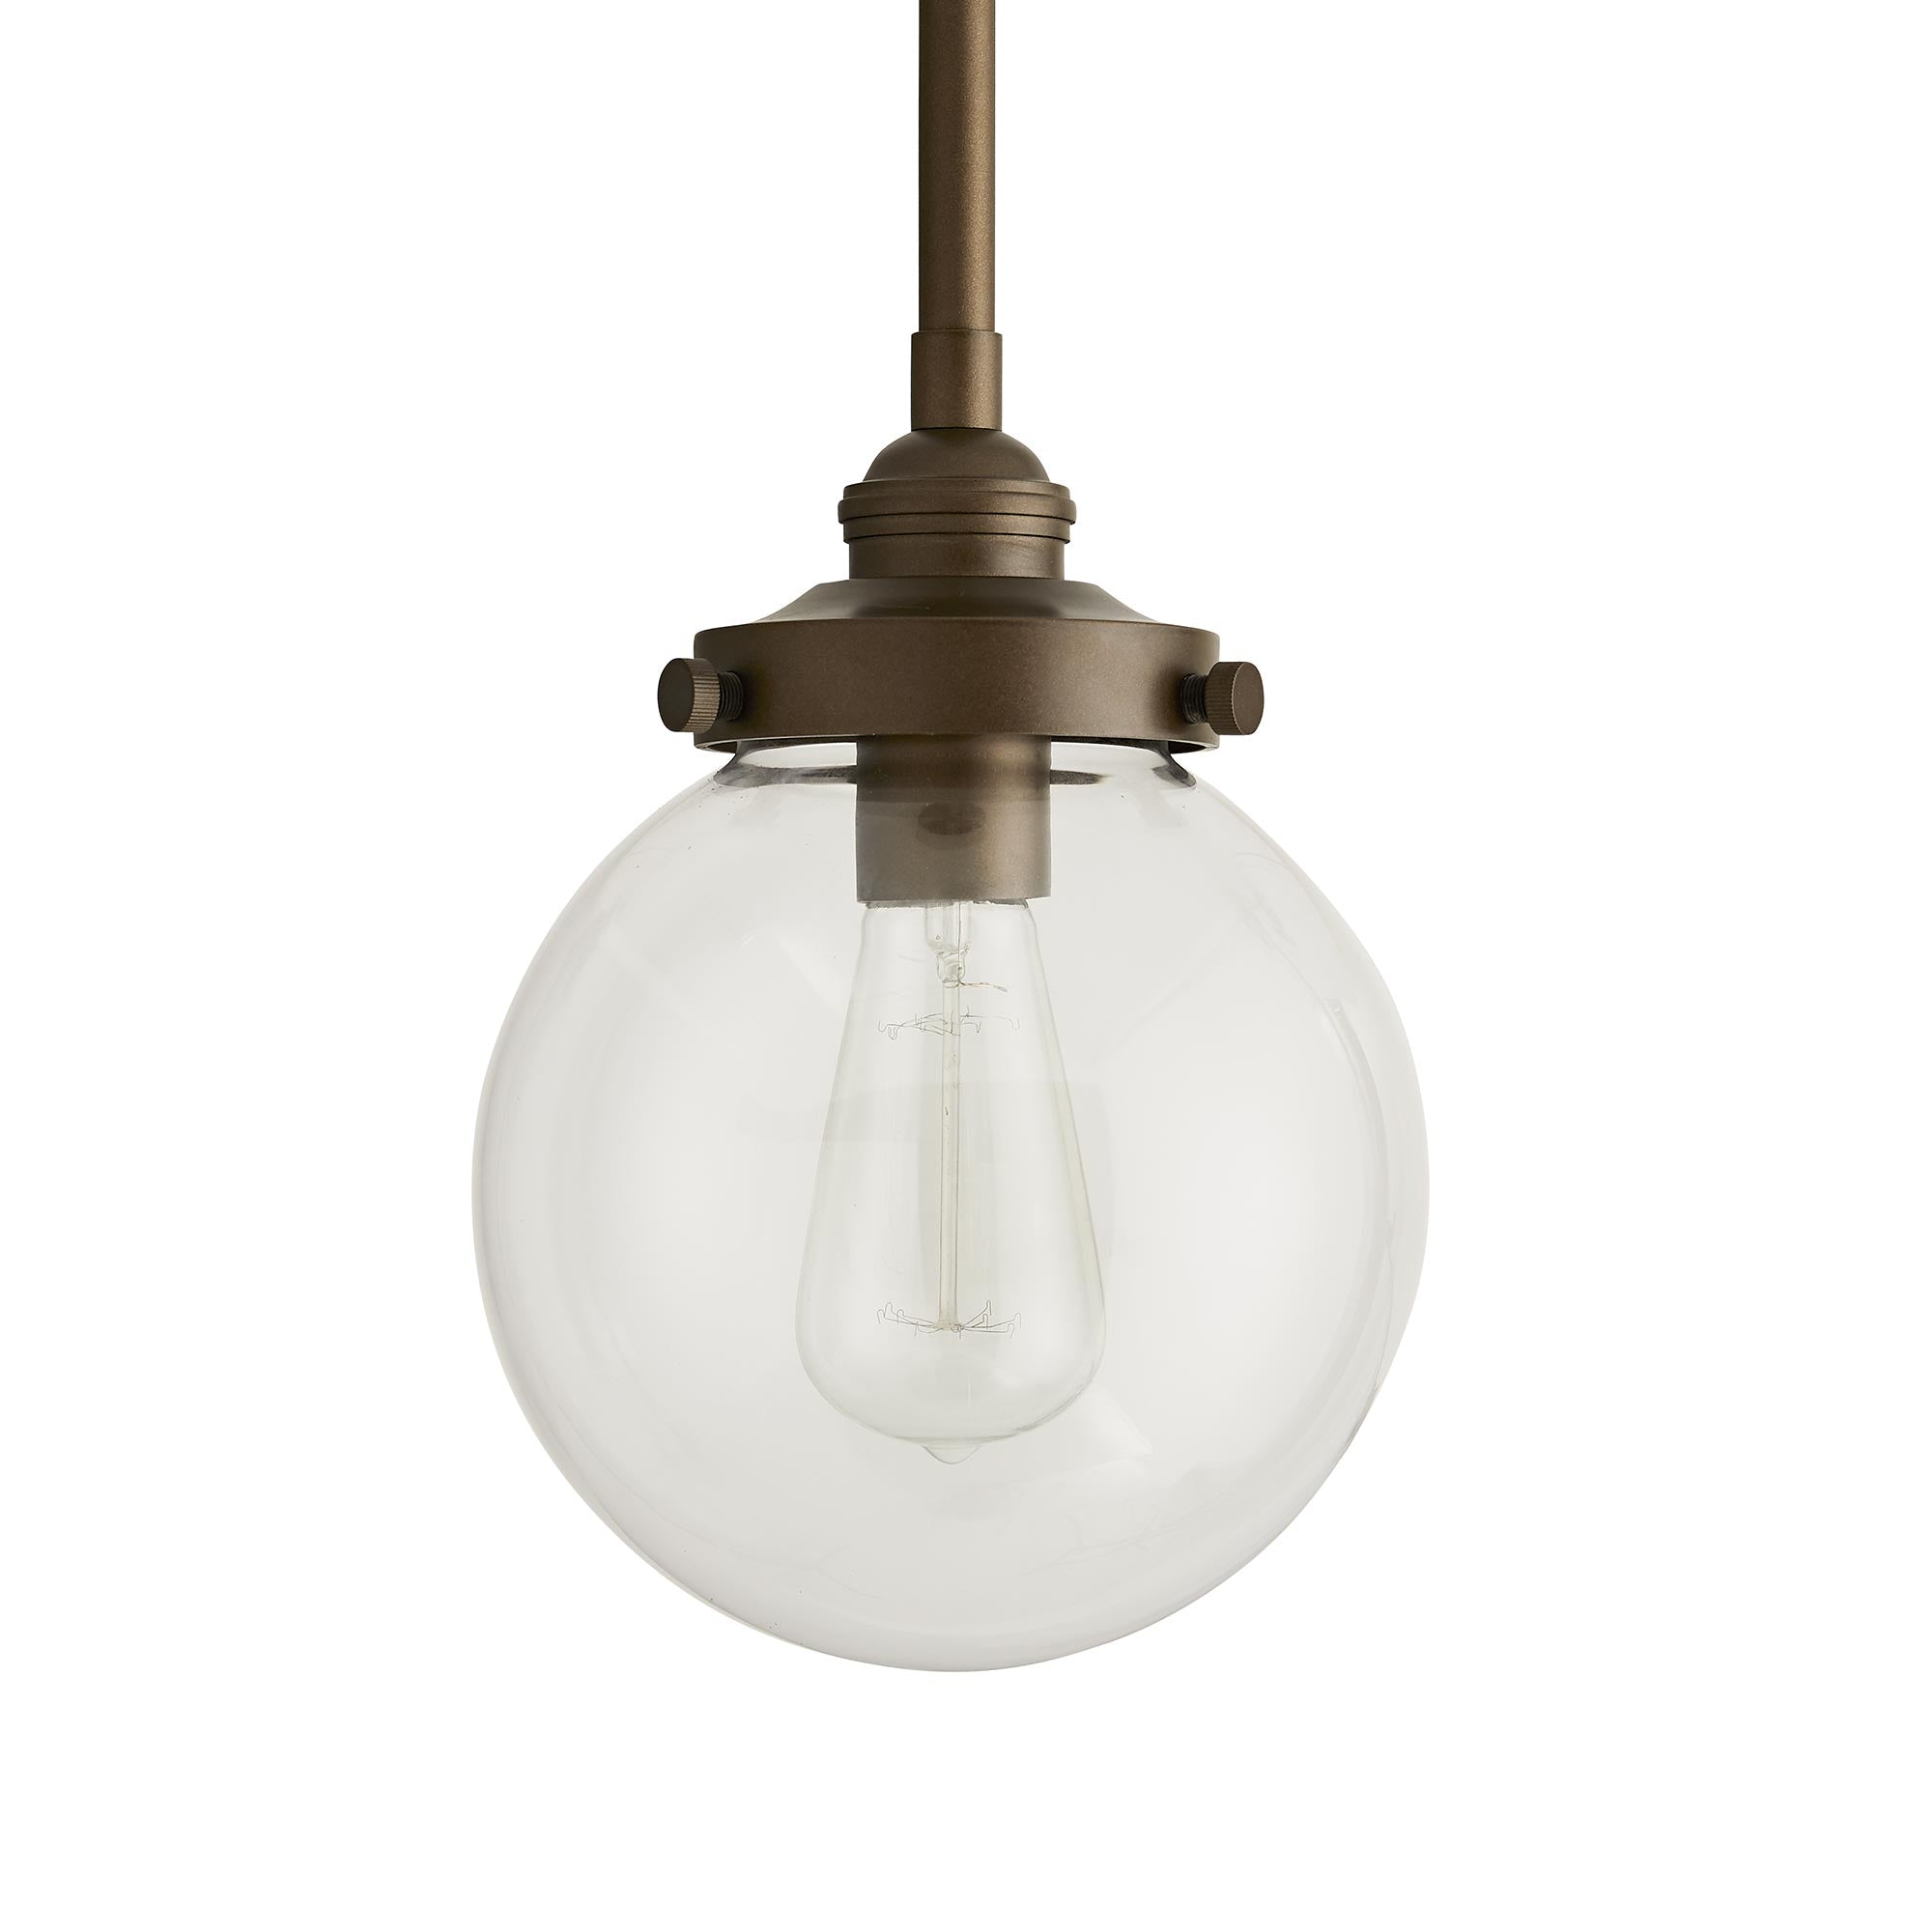 Arteriors Reeves Small Outdoor Pendant 49211